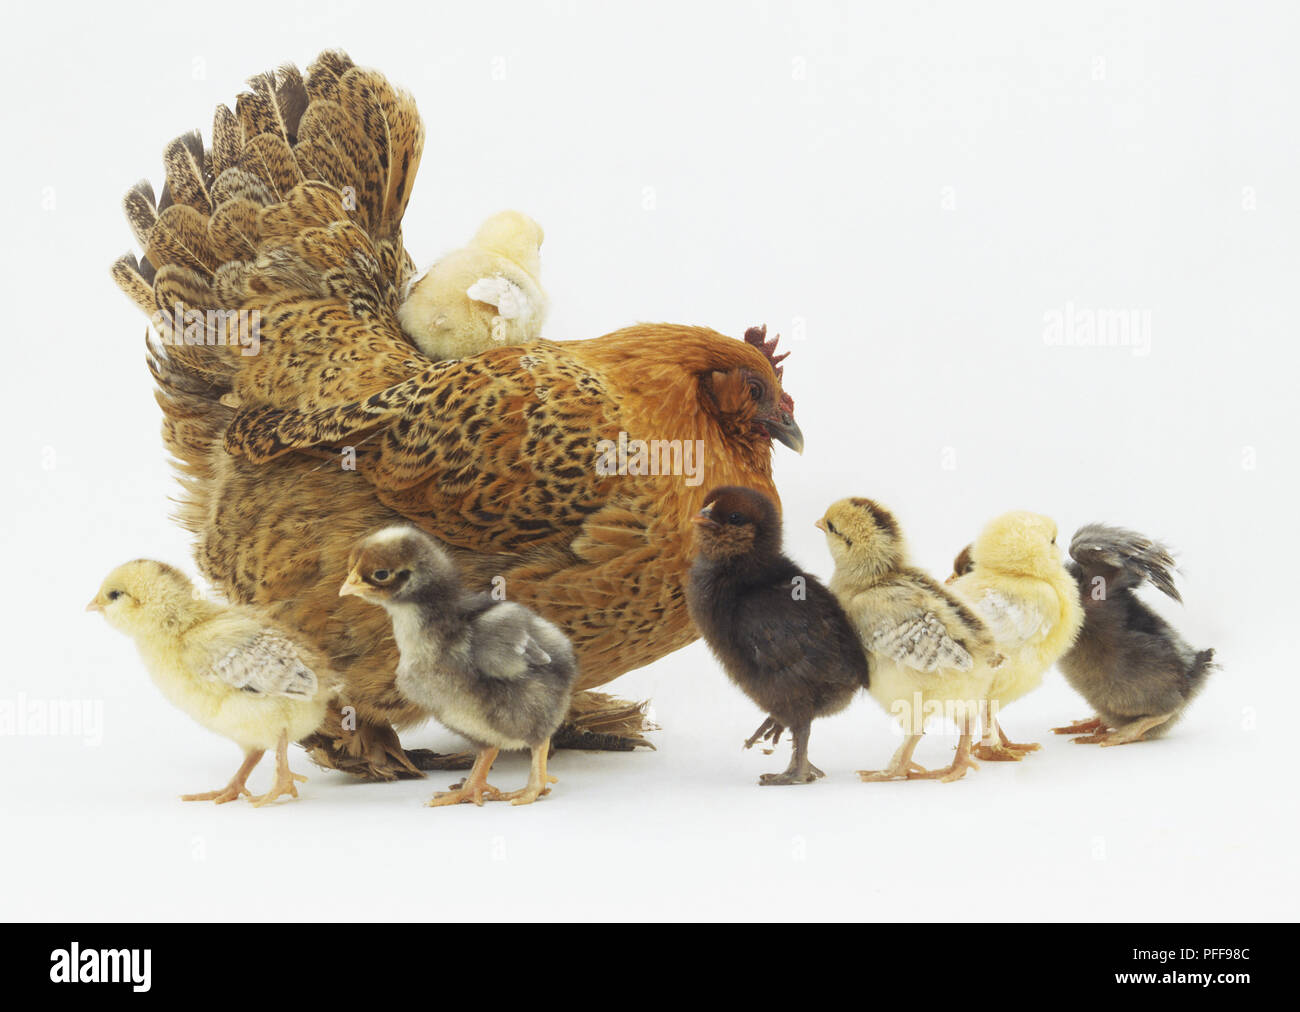 https://c8.alamy.com/comp/PFF98C/mother-hen-gallus-gallus-with-six-yellow-and-black-chicks-walking-by-her-side-and-another-chick-sitting-on-her-back-side-view-PFF98C.jpg